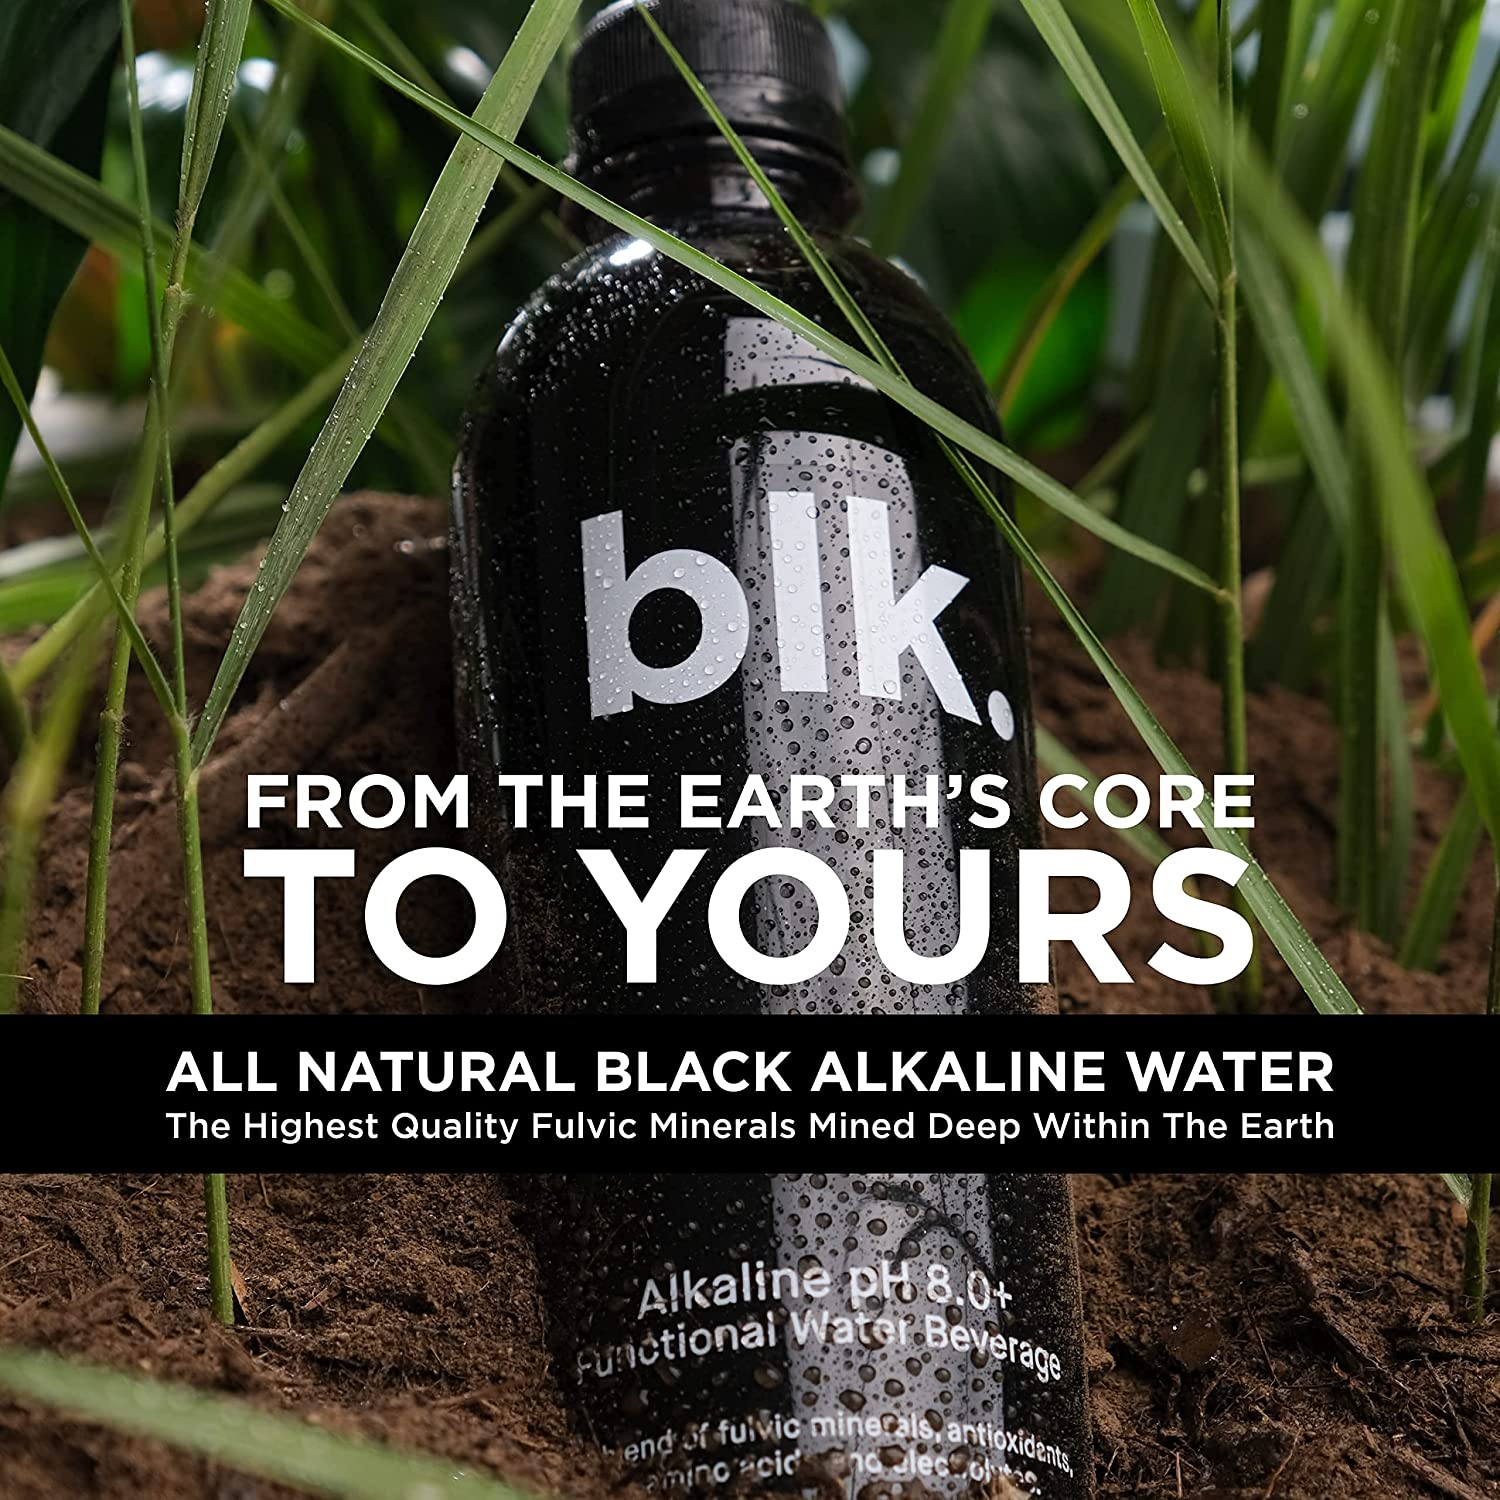 https://bigbigmart.com/wp-content/uploads/2022/02/blk.-Natural-Mineral-Alkaline-Water-ph8-Bioavailable-Fulvic-Humic-Acid-Extract-16.9oz-12pk3.jpg